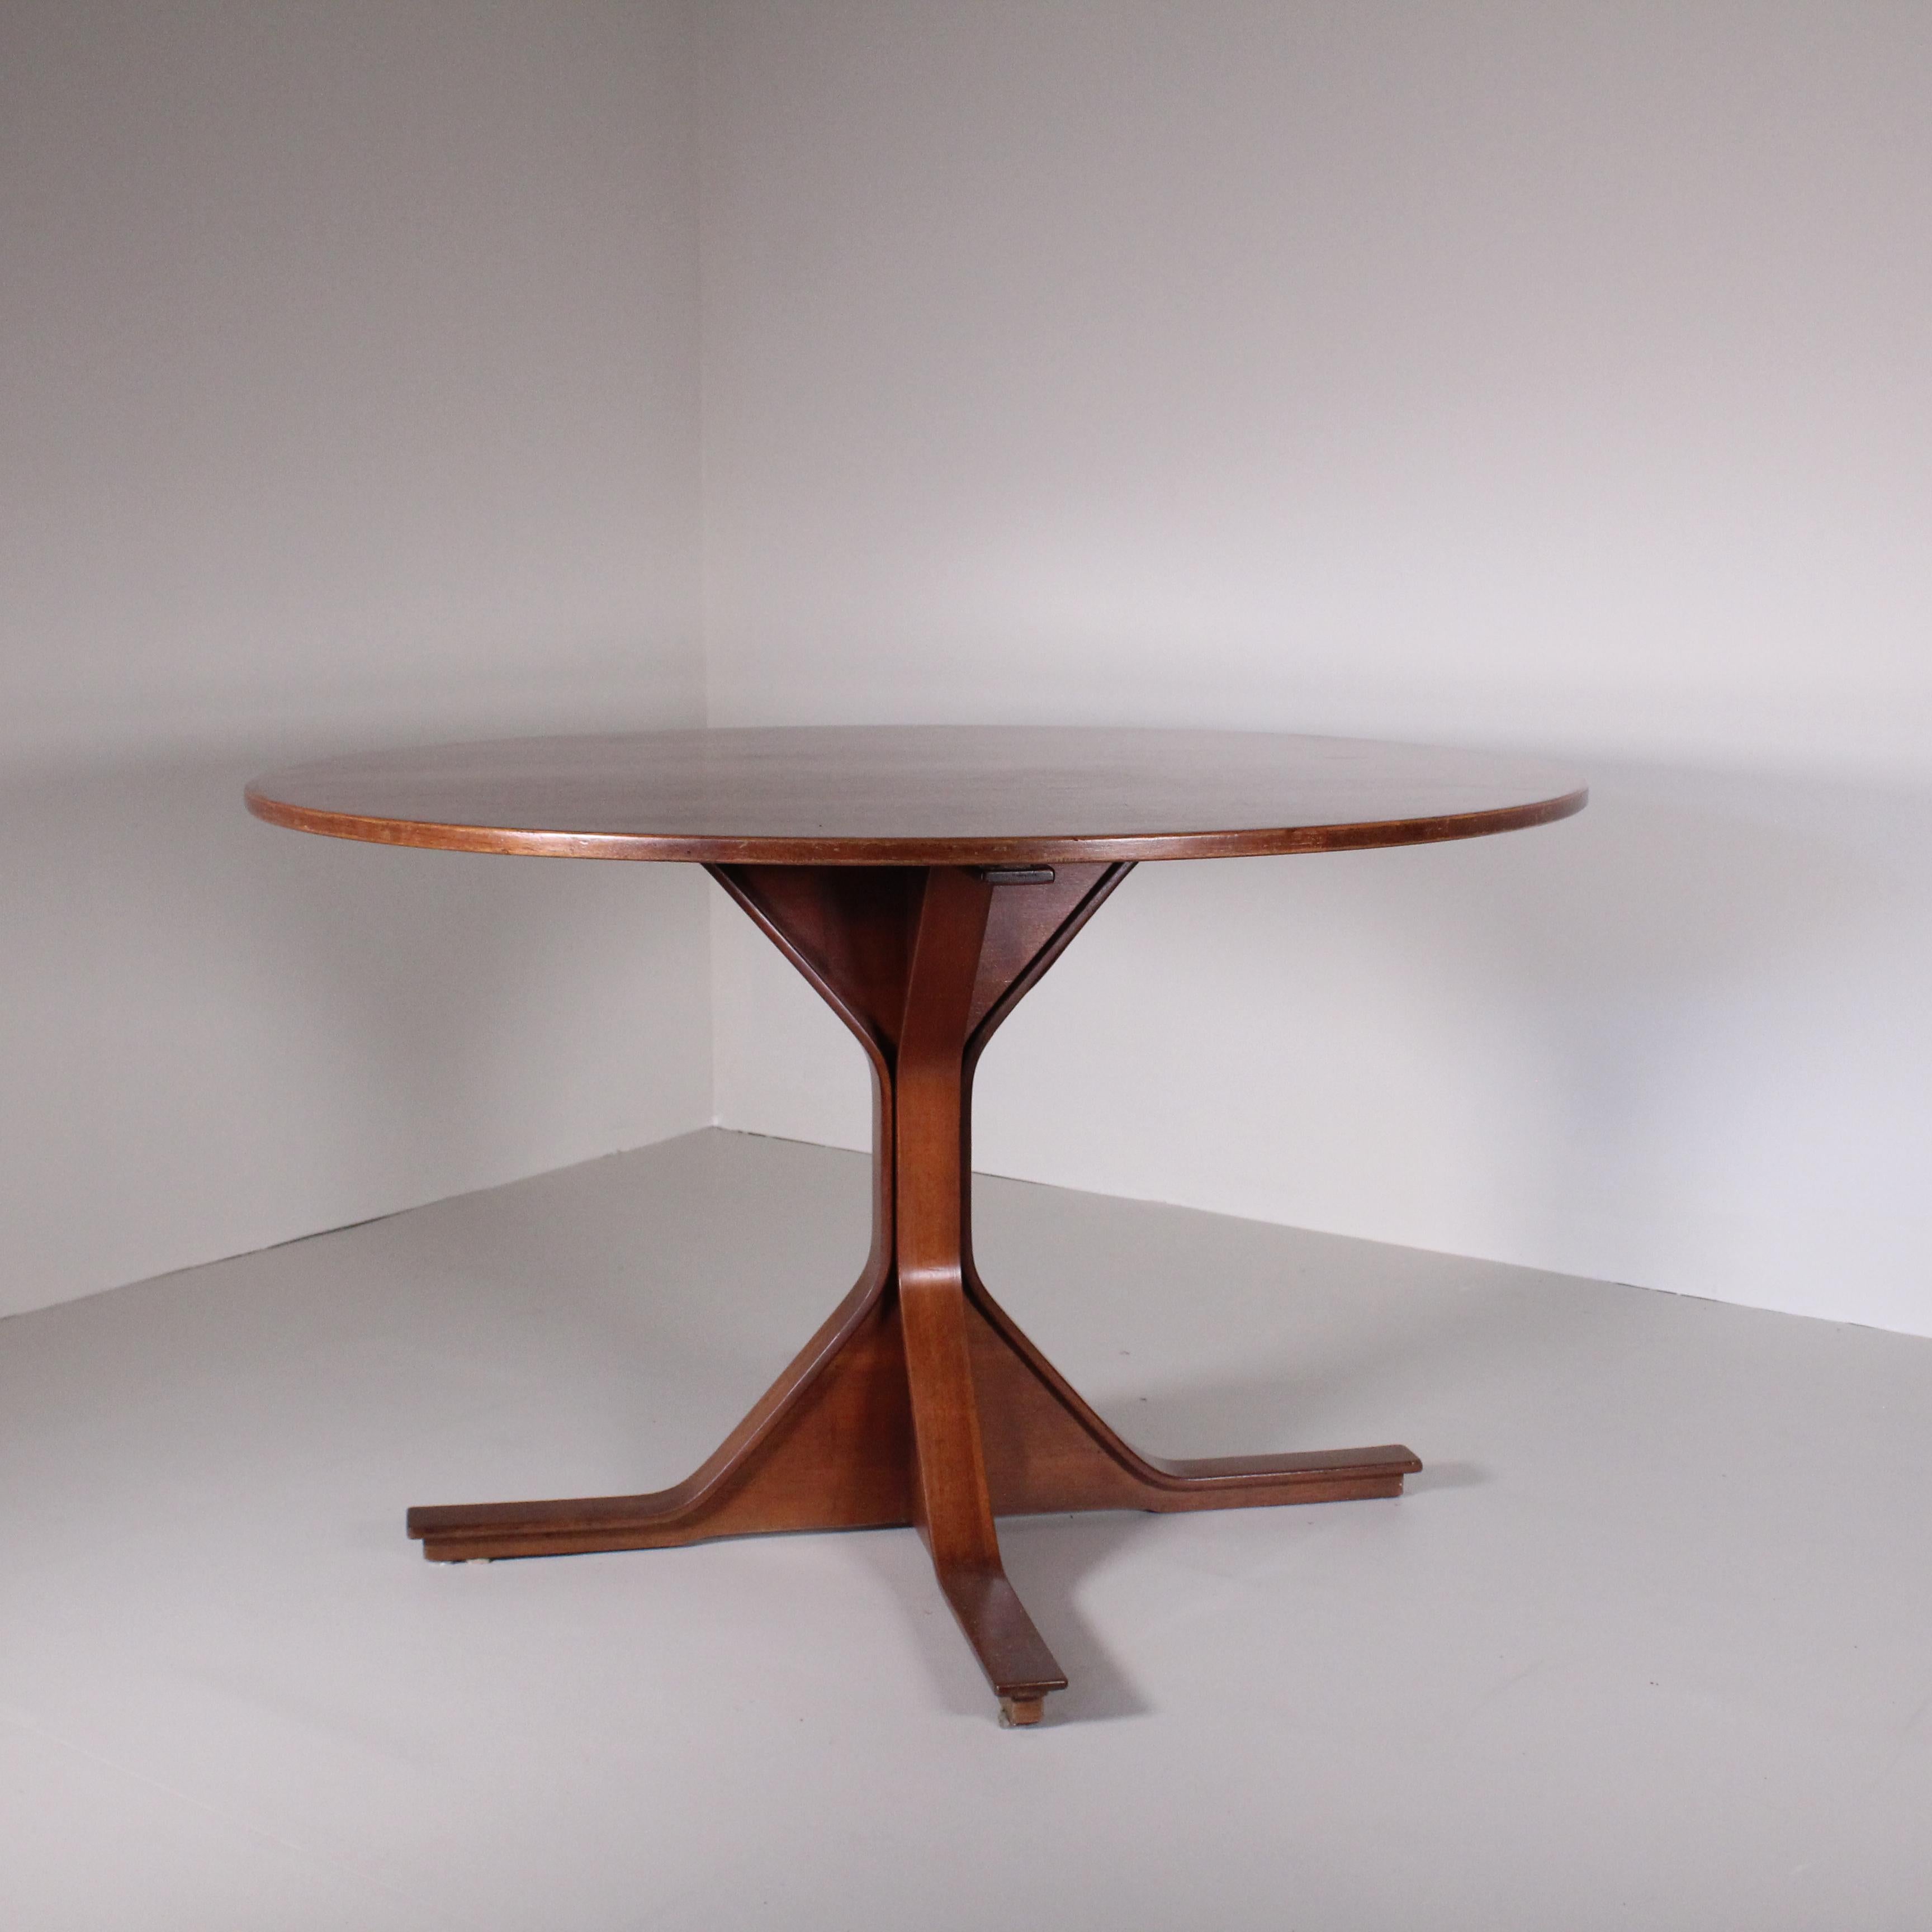 The 522 table, by Gianfranco Frattini for Bernini, represents the excellence of 1960s Italian design. Made with rosewood veneer, this table embodies an unparalleled aesthetic quality. Its clean, minimalist design makes it perfect for classic and